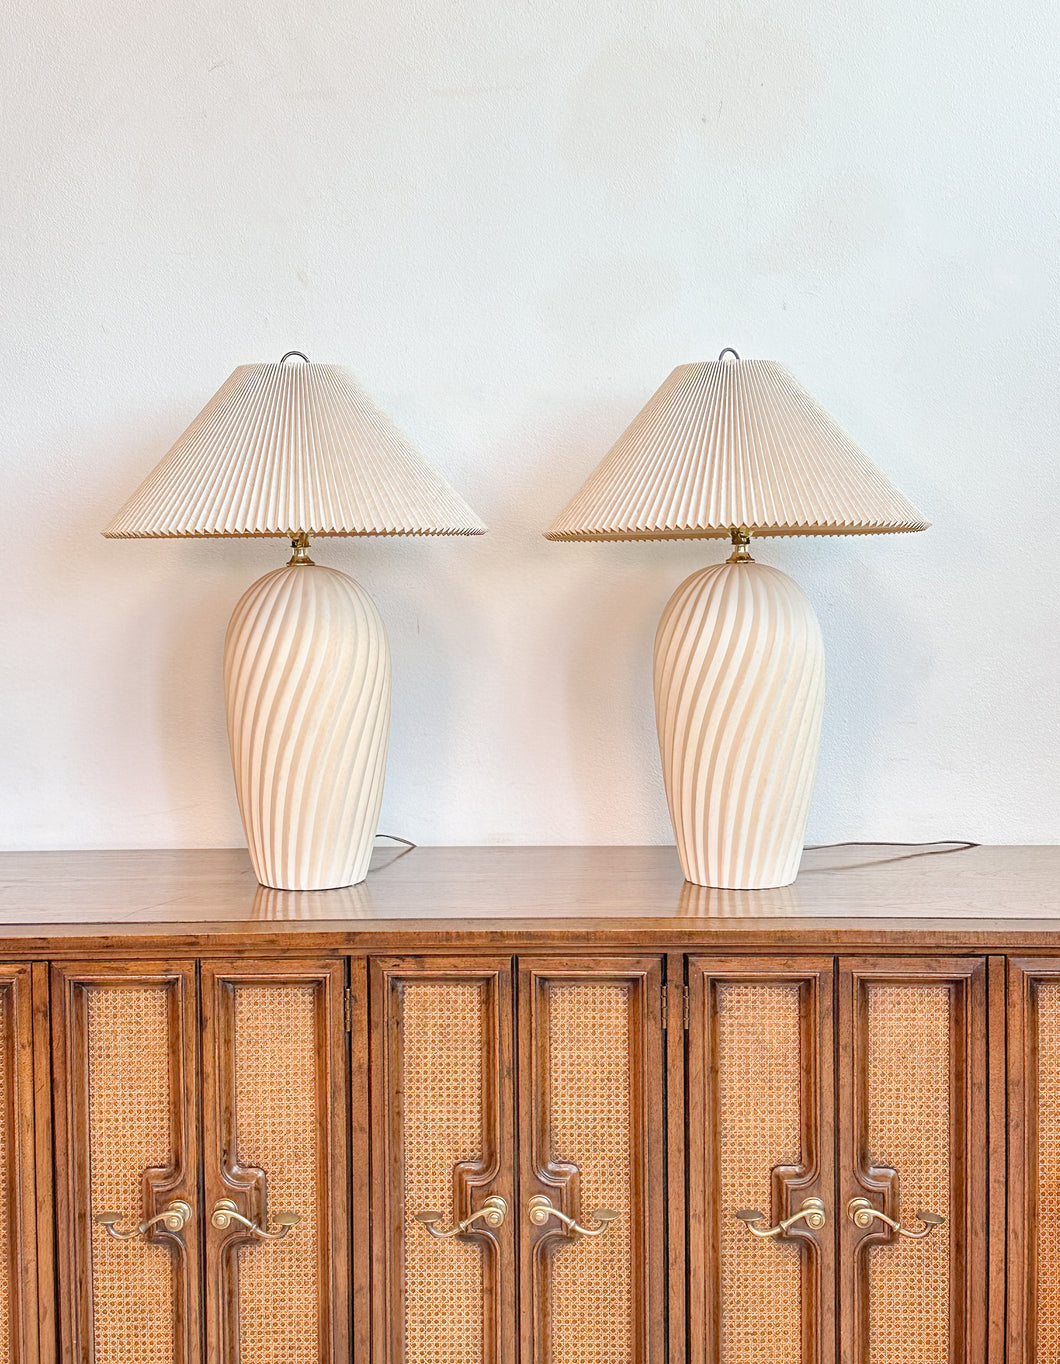 Pair of Pleated Lamps